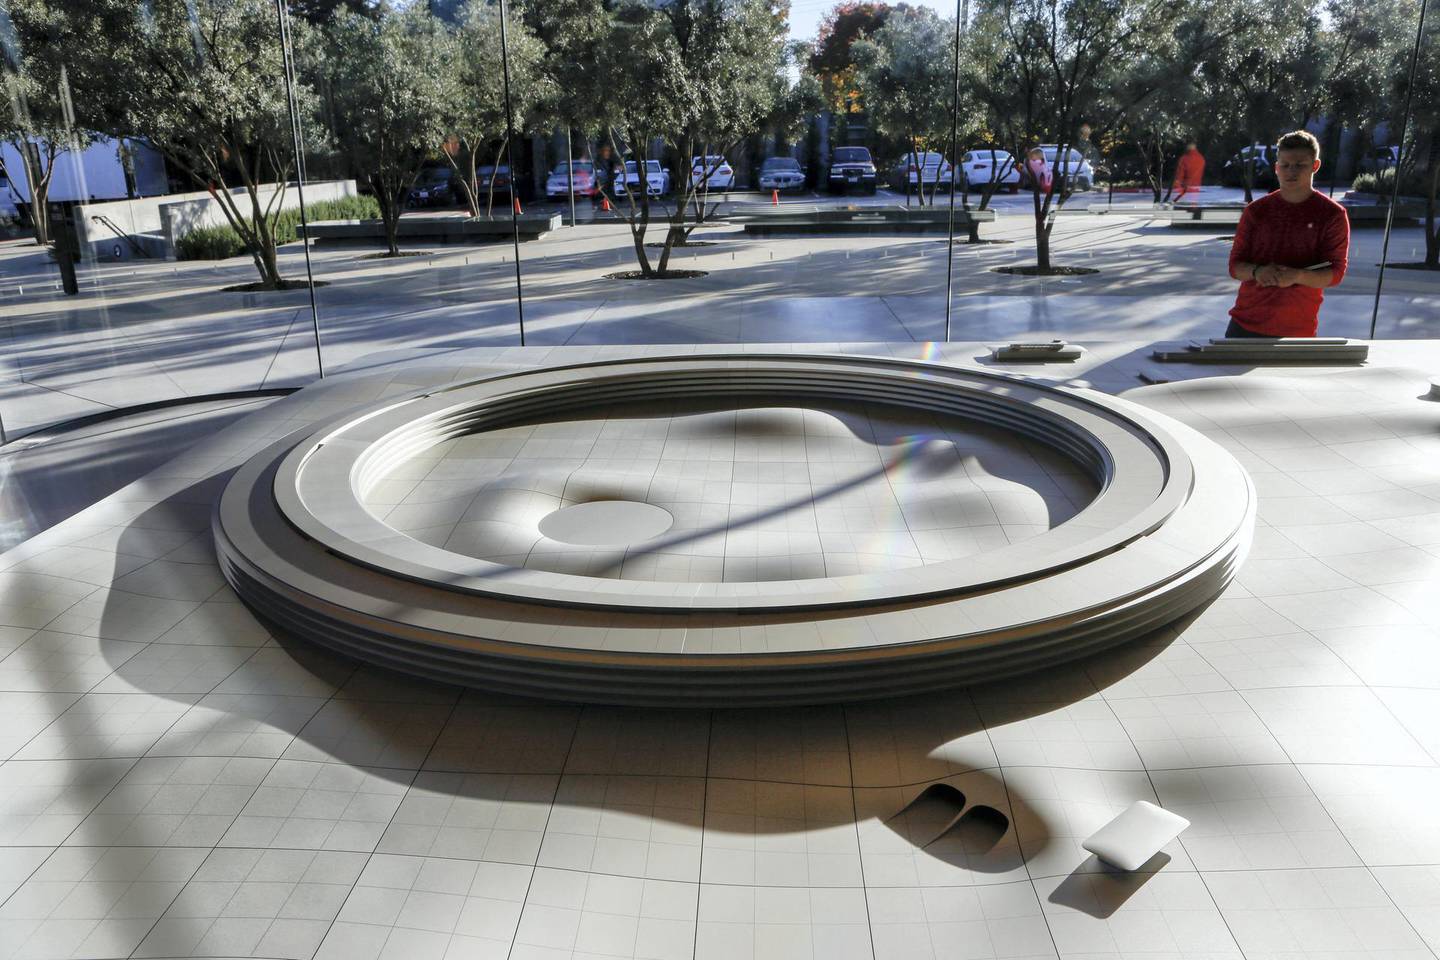 An aluminum alloy model with augmented reality showing the finished Apple Park is displayed at the Apple Park Visitor Center on November 17, 2017 in Cupertino, California. (Photo by Amy Osborne / AFP)